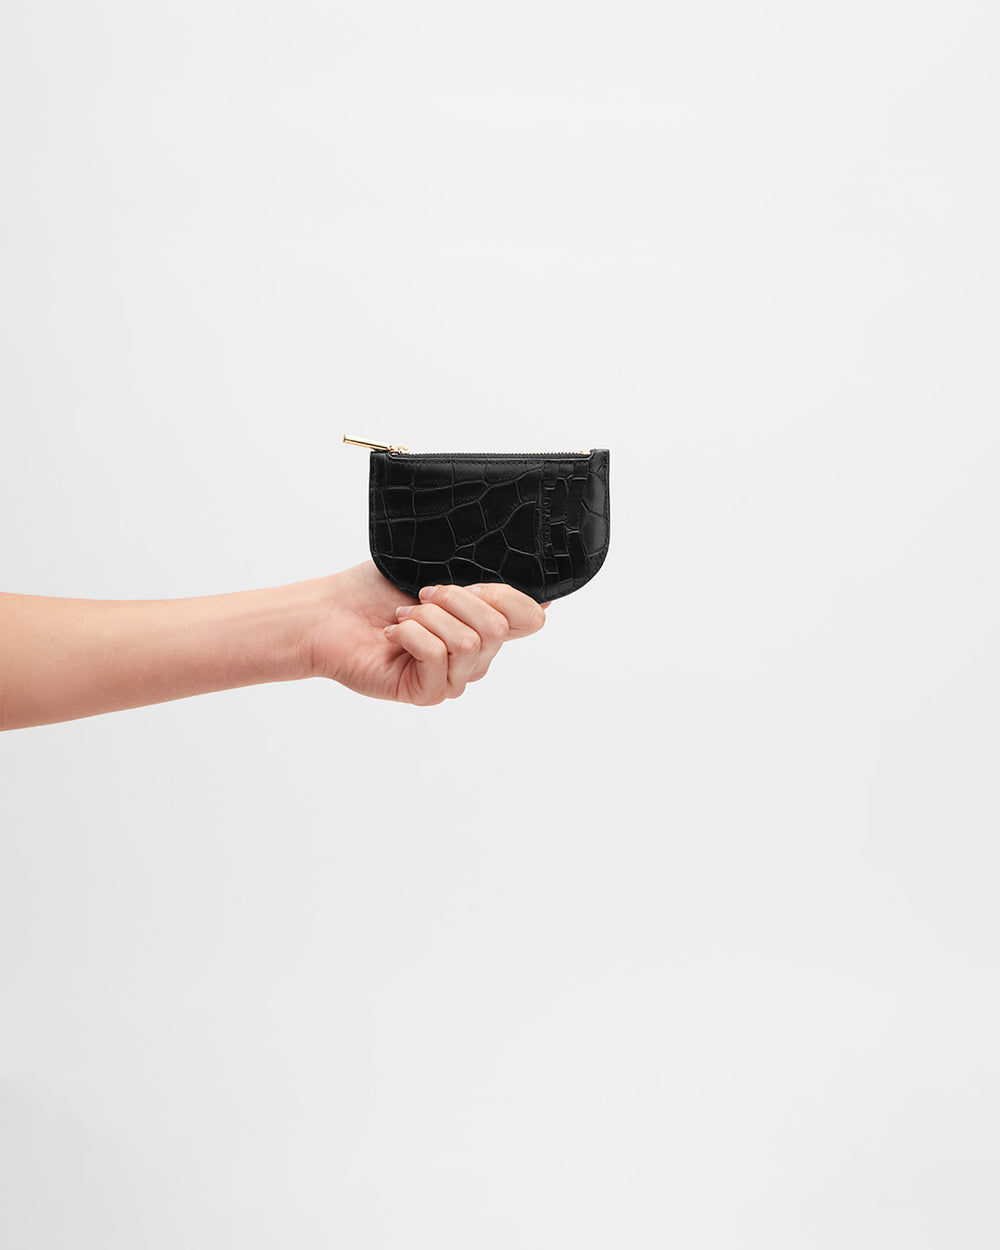 Black leather curved coin purse